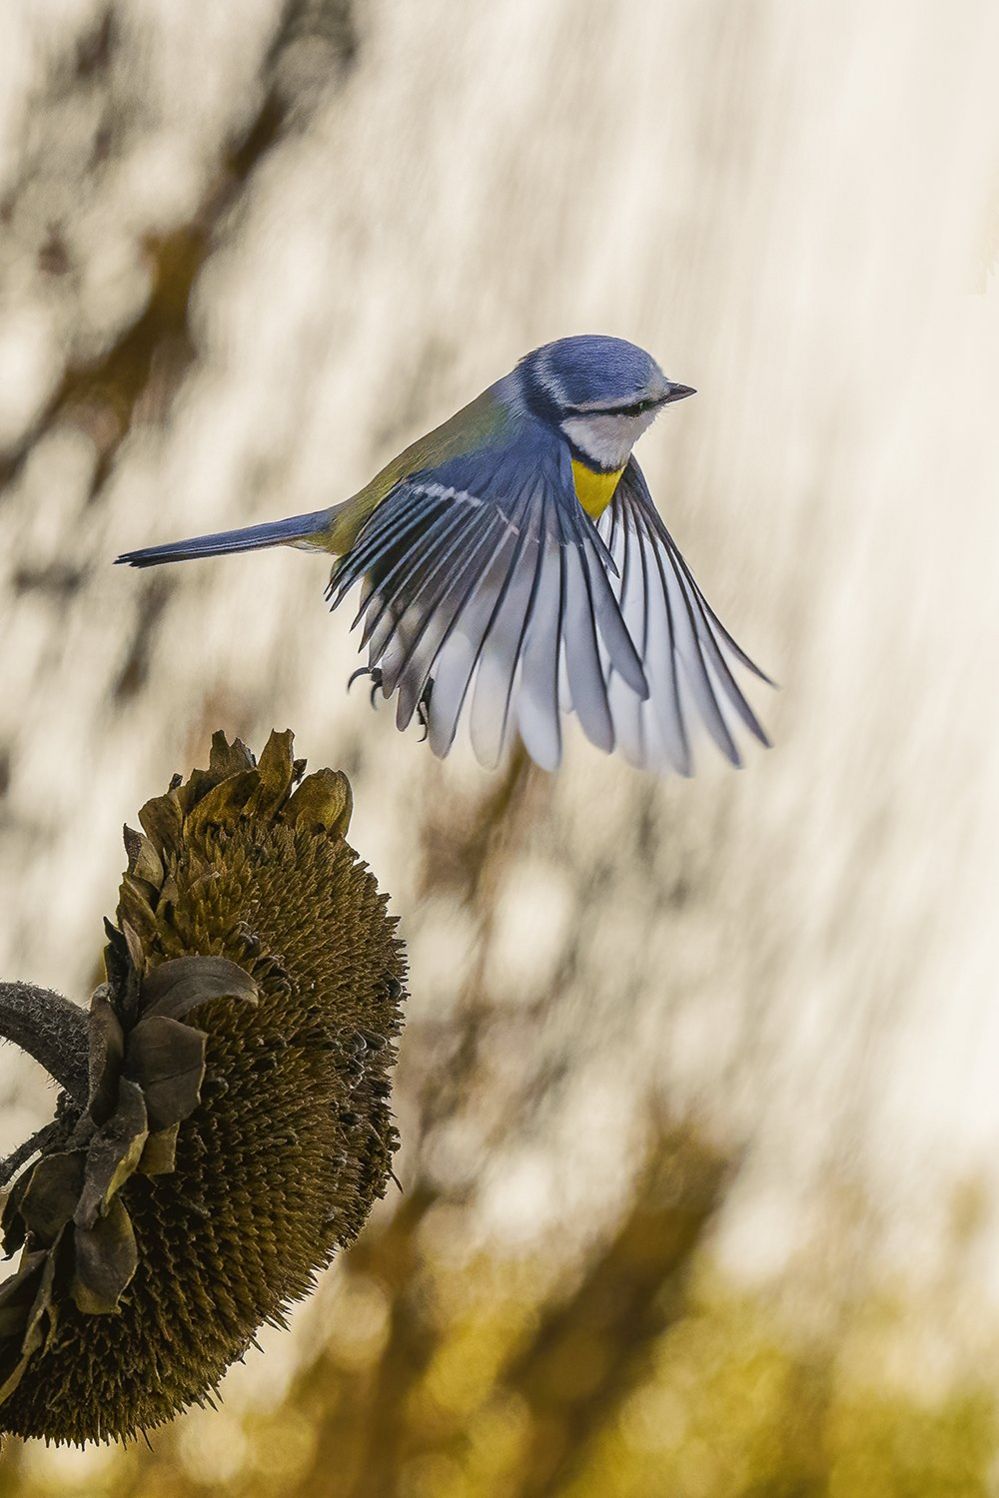 A blue tit takes flight from a sunflower